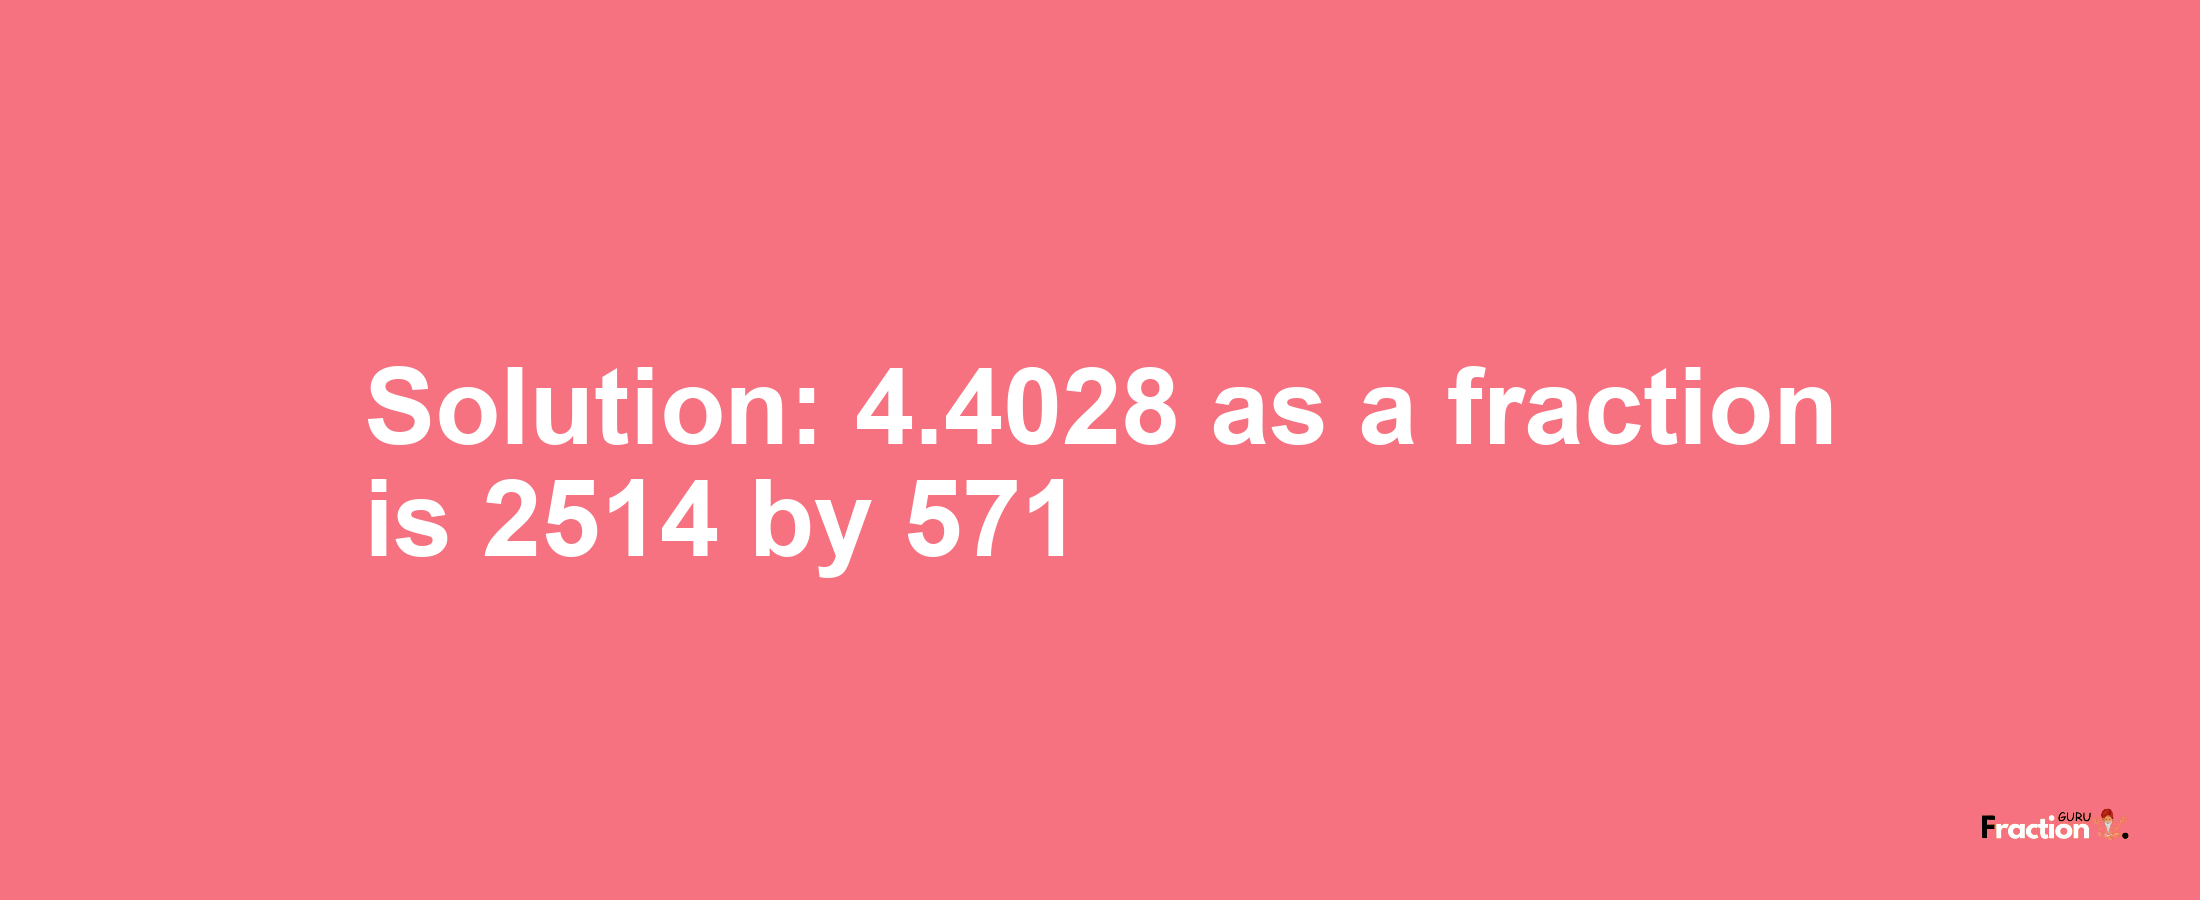 Solution:4.4028 as a fraction is 2514/571